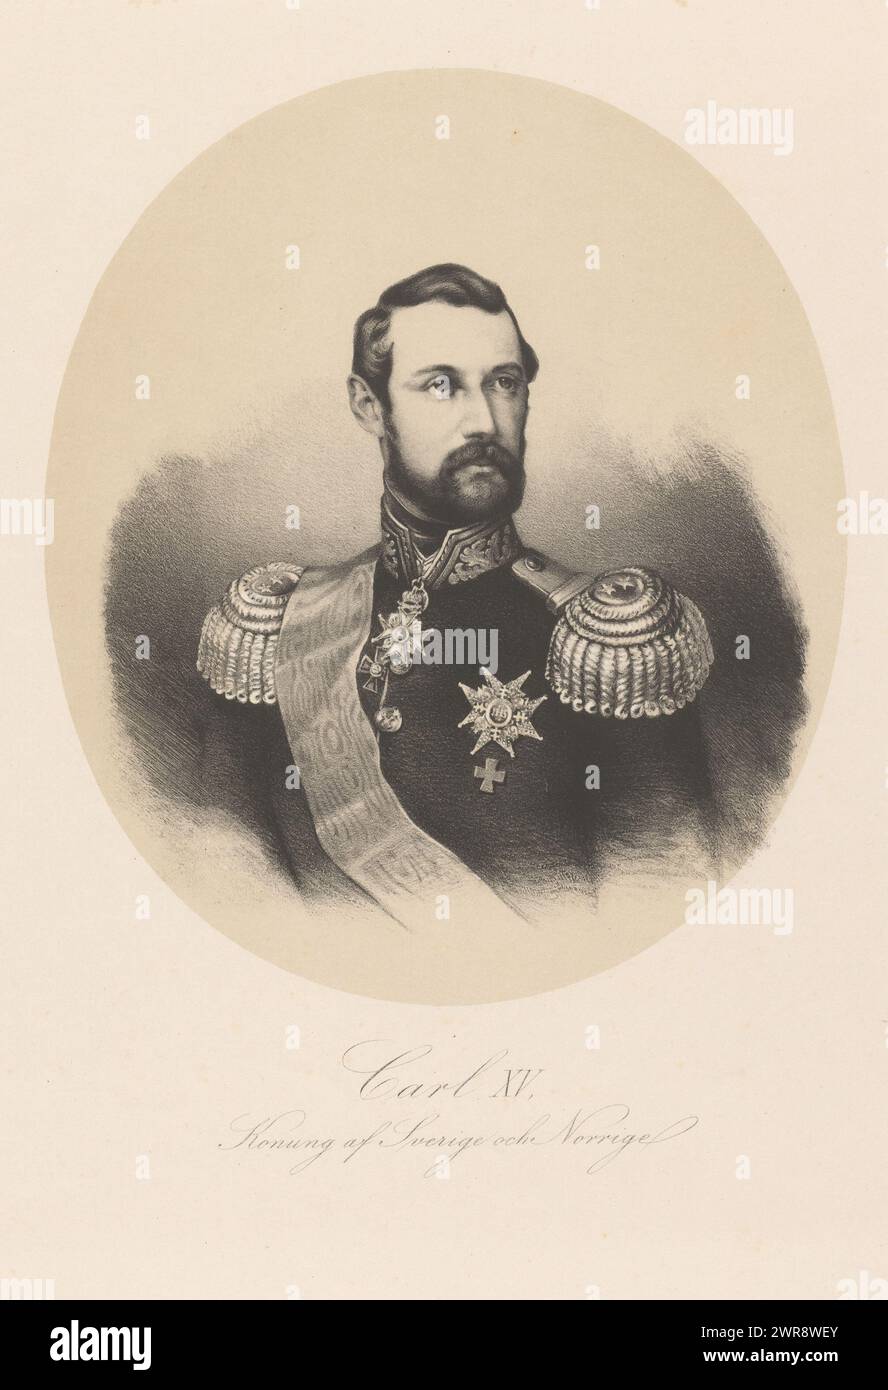 Portrait of Charles XV of Sweden, Carl XV, Konung af Sverige och Norrige (title on object), print maker: anonymous, Zweden, (possibly), 1859 - 1899, paper, height 497 mm × width 352 mm, print Stock Photo